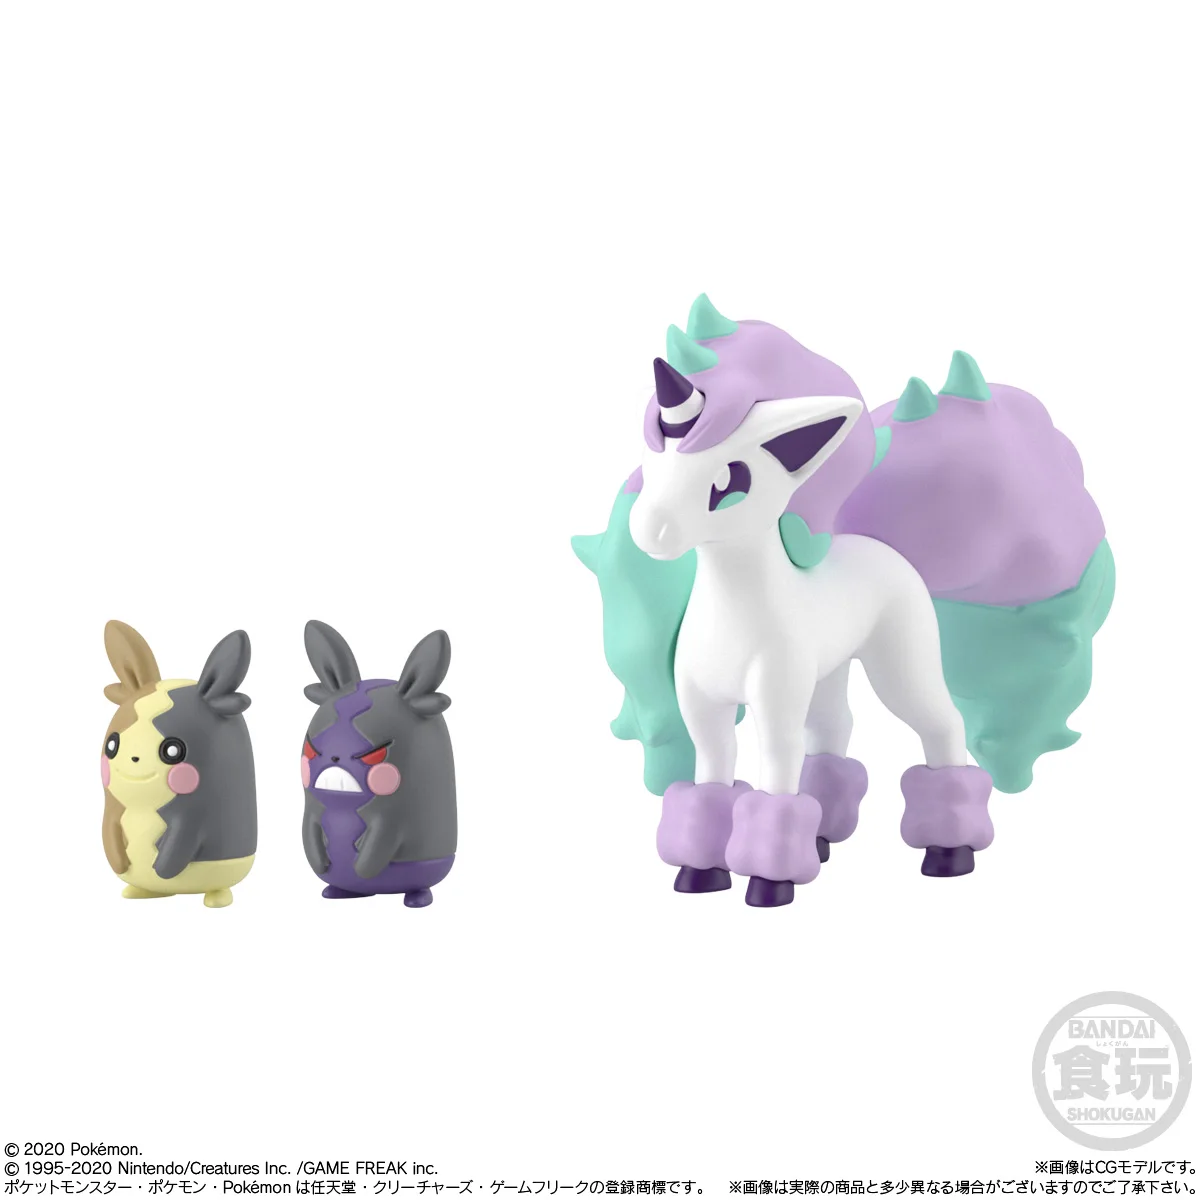 BANDAI SCALE WORLD Pokemon Galar Region 2 Max Harley Anime Action Figures Collectible Model Kawaii for Kids Gifts Genuine